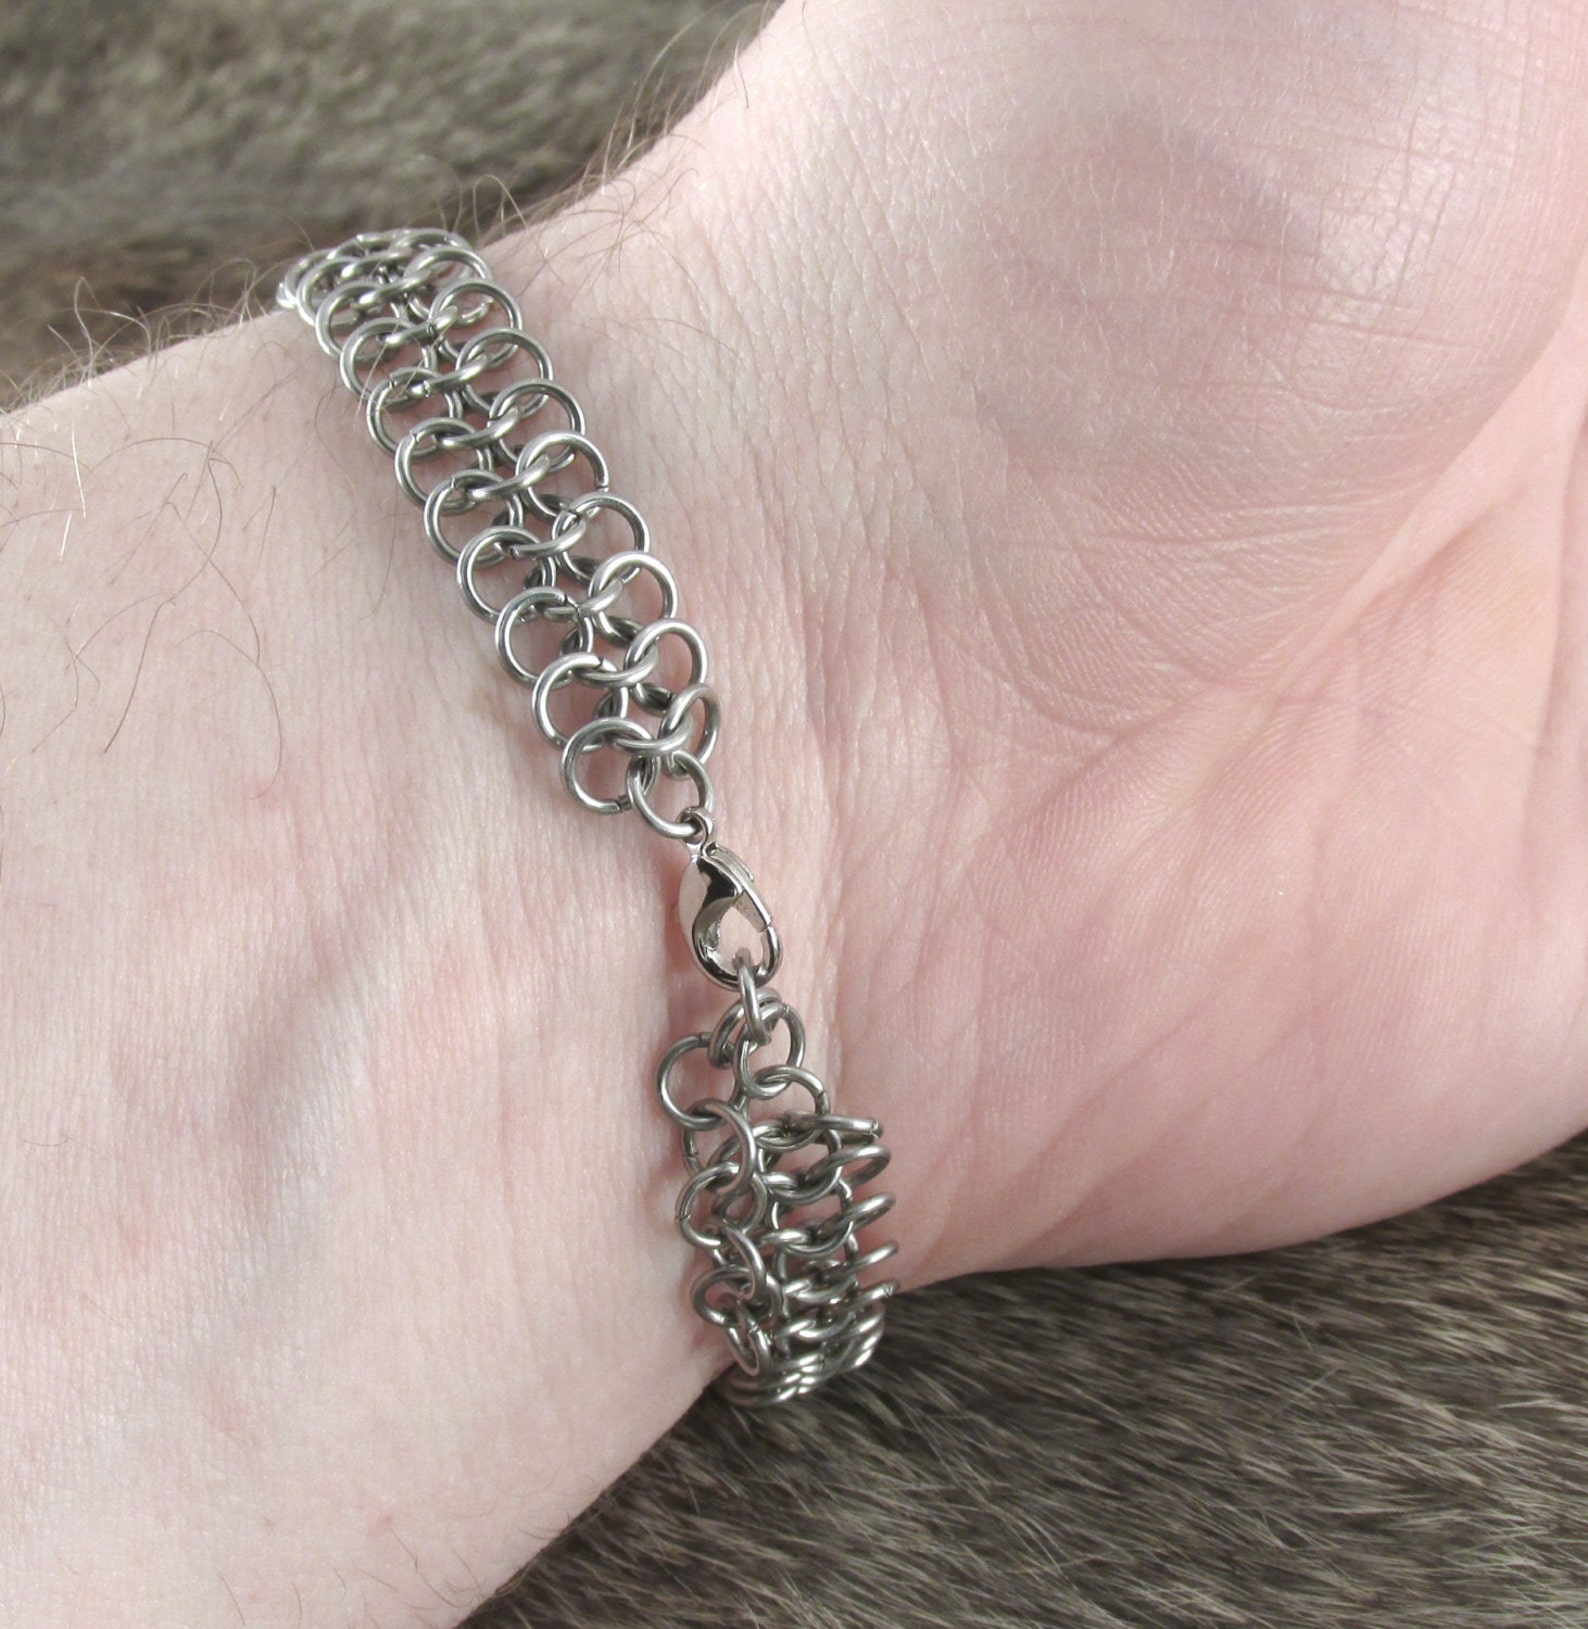 Chainmaille Stainless Steel European 4 in 1 Band Bracelet | Etsy